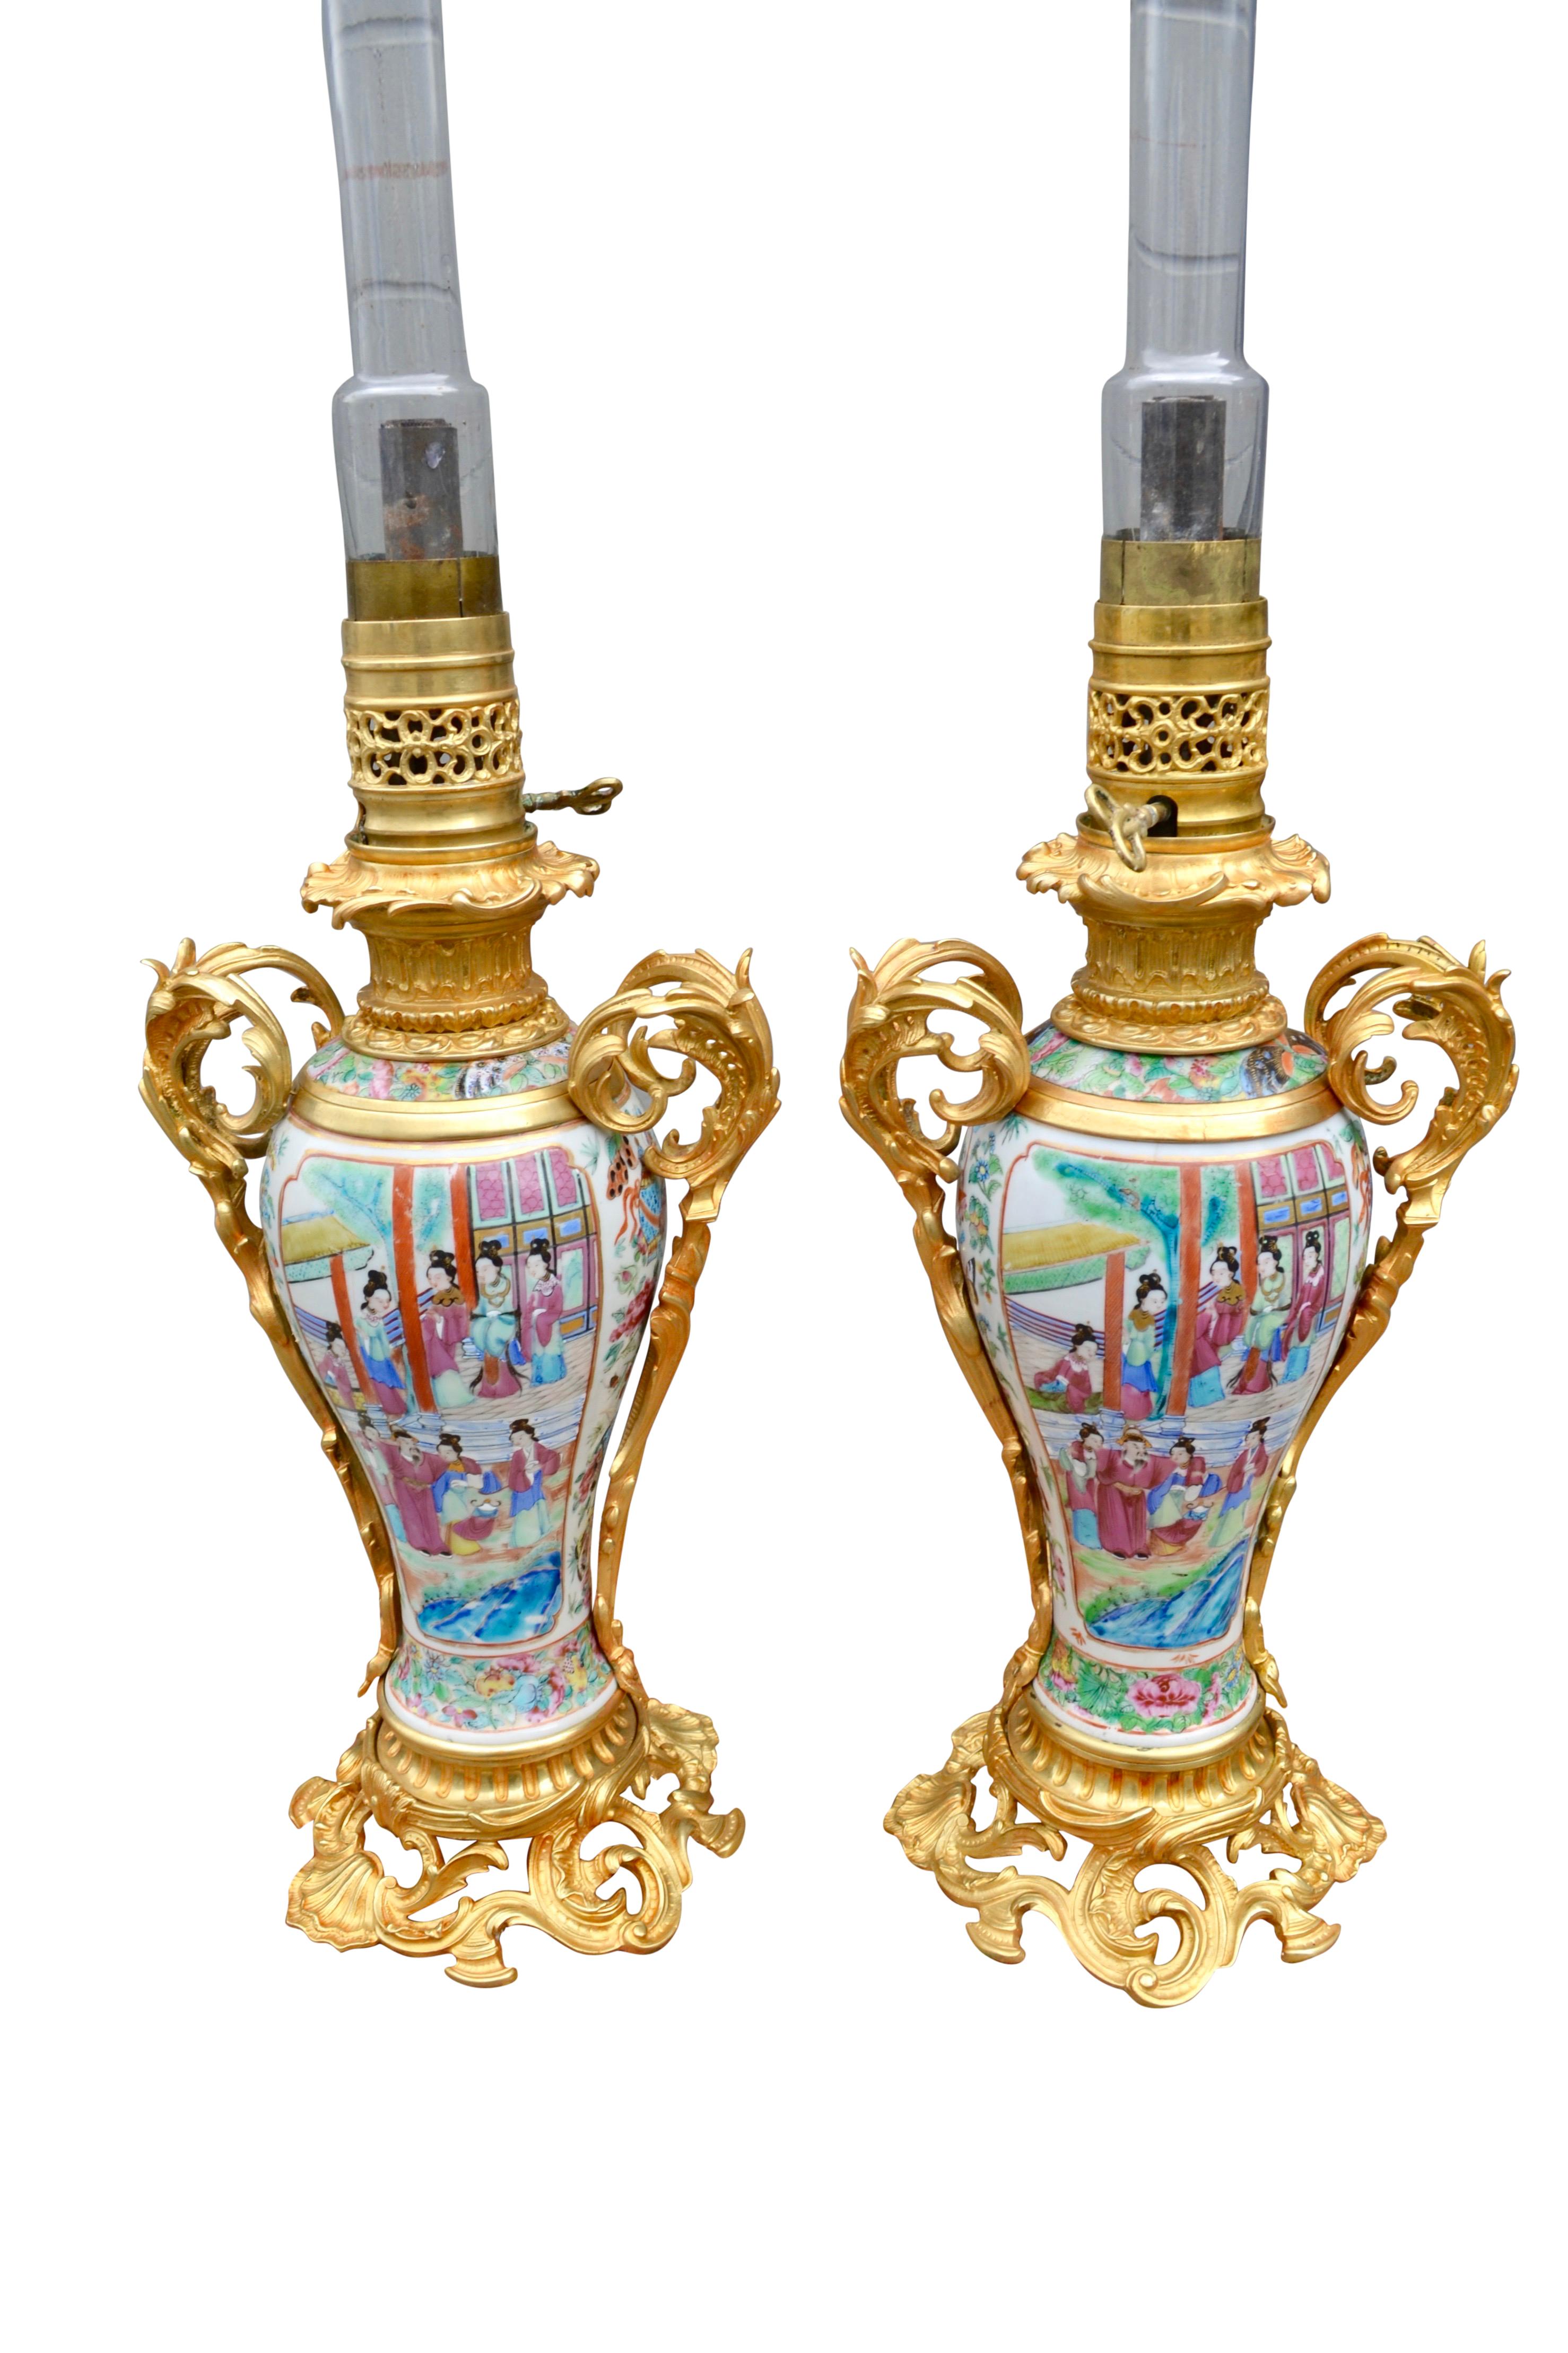 19th Century Rare Pair of Famille Rose Porcelain and Ormolu Napoleon III Oil Lamps For Sale